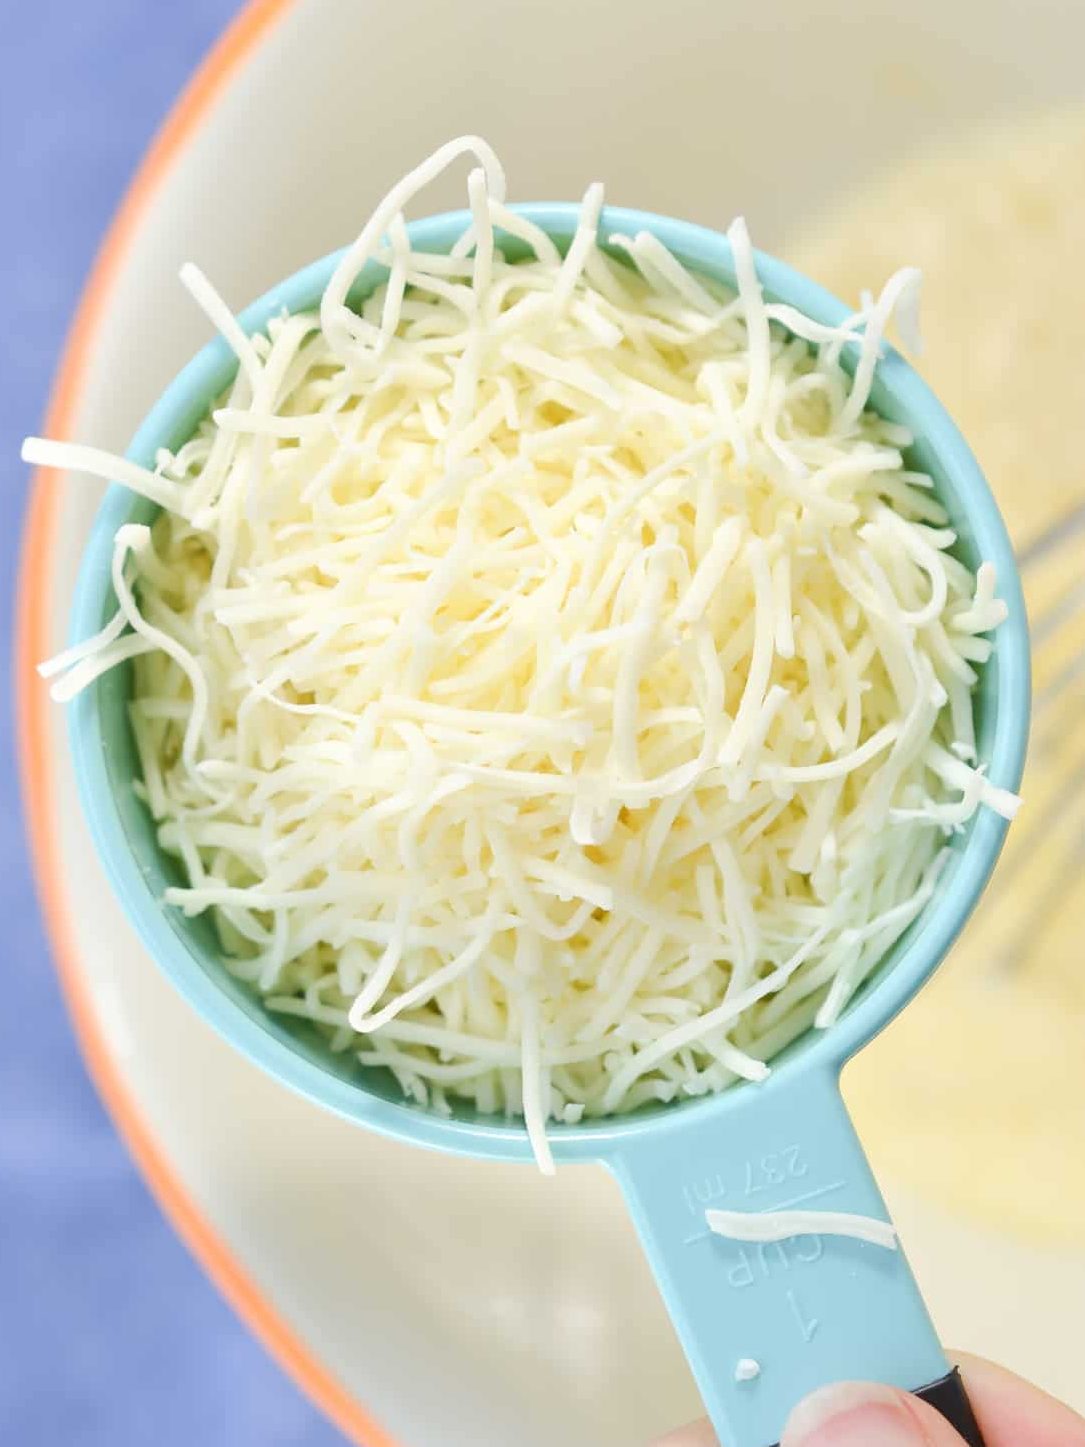 add 1 cup of each of the shredded cheeses.